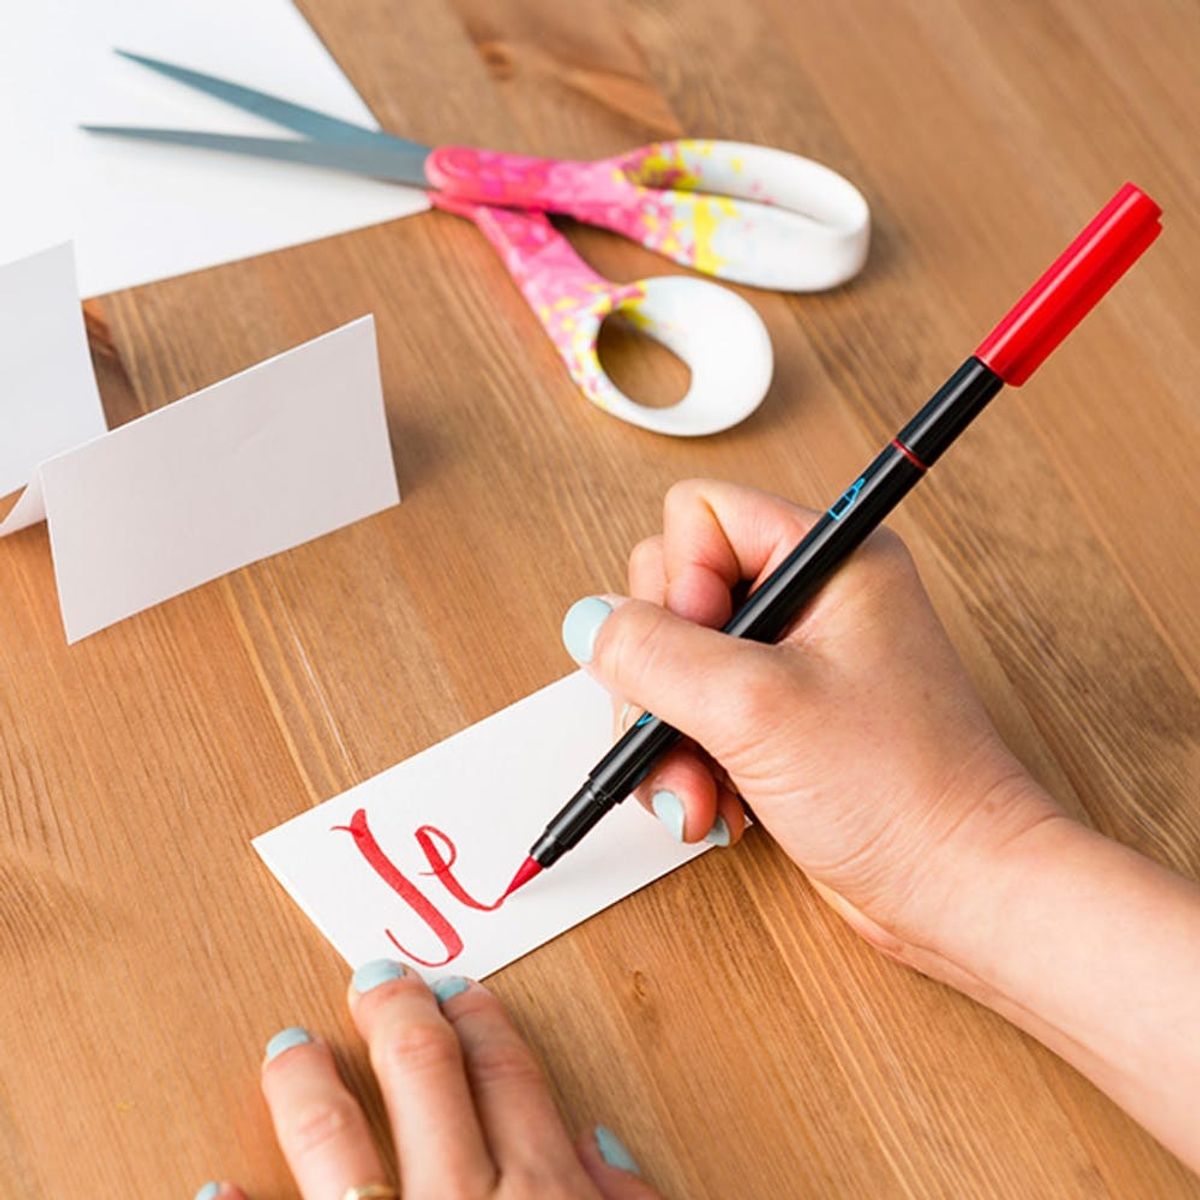 Use This FREE Hand Lettering Guide to DIY Holiday Place Cards (And More!)